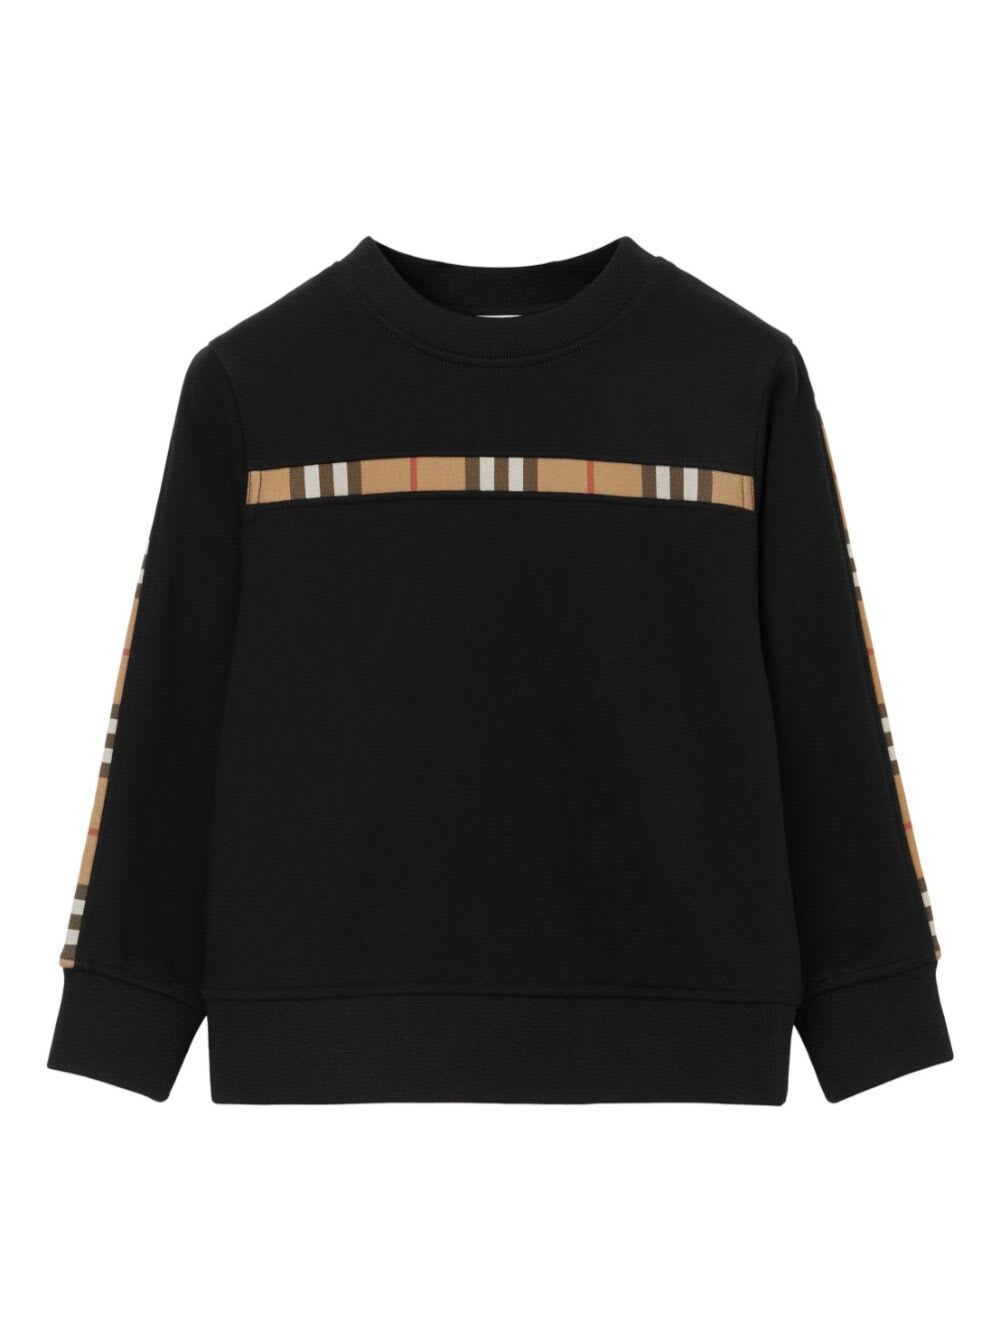 BURBERRY BLACK CREWNECK SWEATSHIRT WITH CHECK PRINT ON THE FRONT AND ON SLEEVES IN COTTON BOY